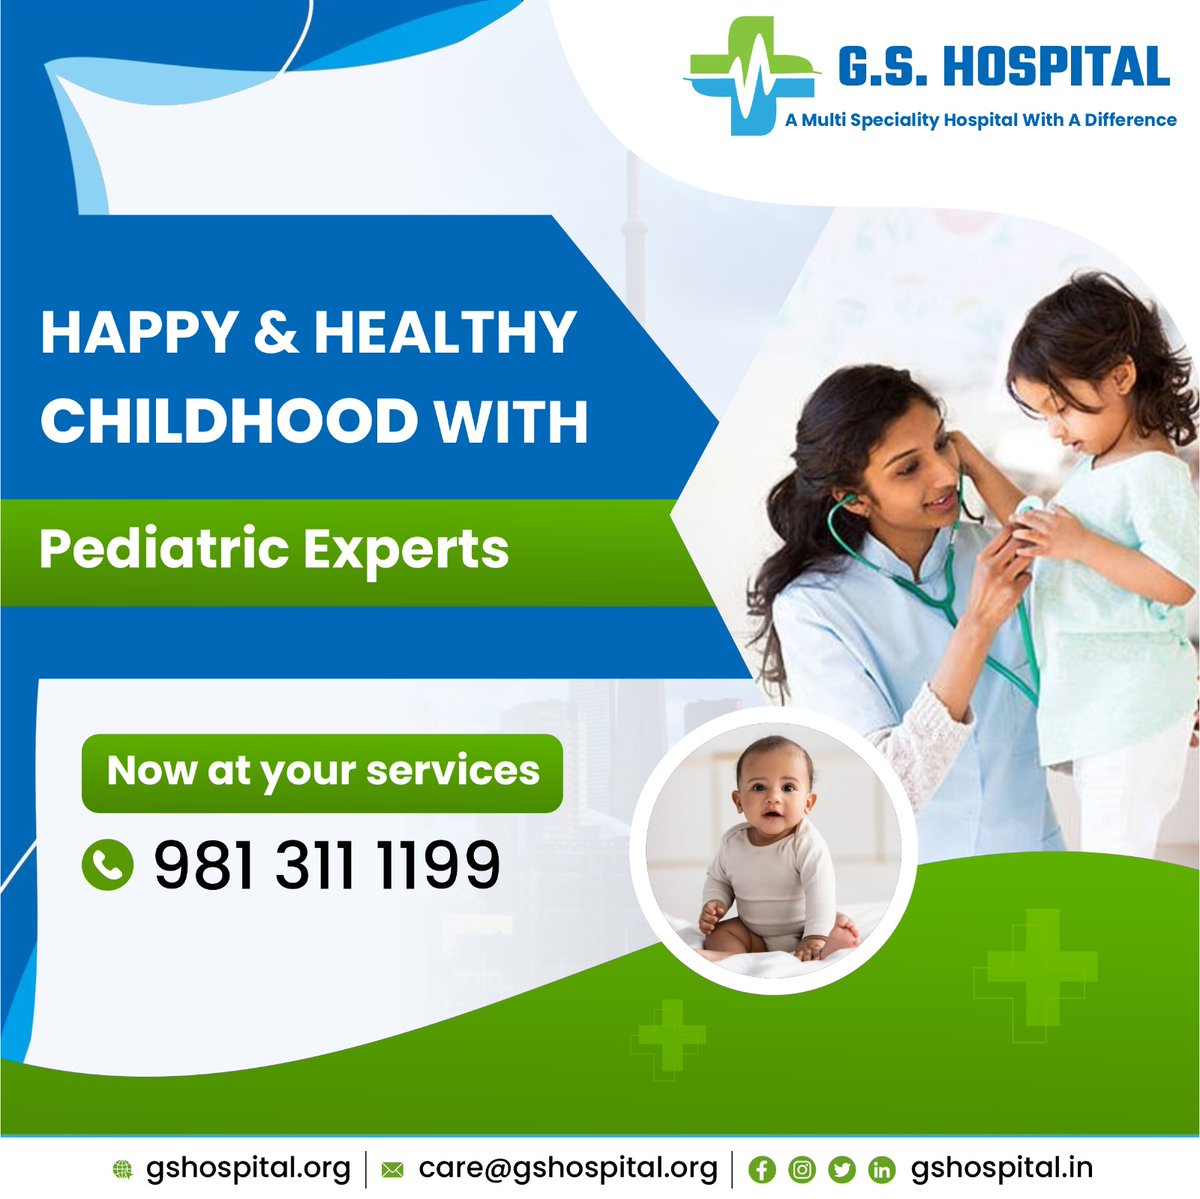 HAPPY & HEALTHY CHILDHOOD WITH Pediatric Experts
.
.
.
.
#ChildHealth #PediatricCare #HealthyKids #ParentingTips #HealthyLife
#ChildWellness #KidsHealth #ChildhoodWellness #FamilyHealth #ChildrensHealth
#HealthyHabits